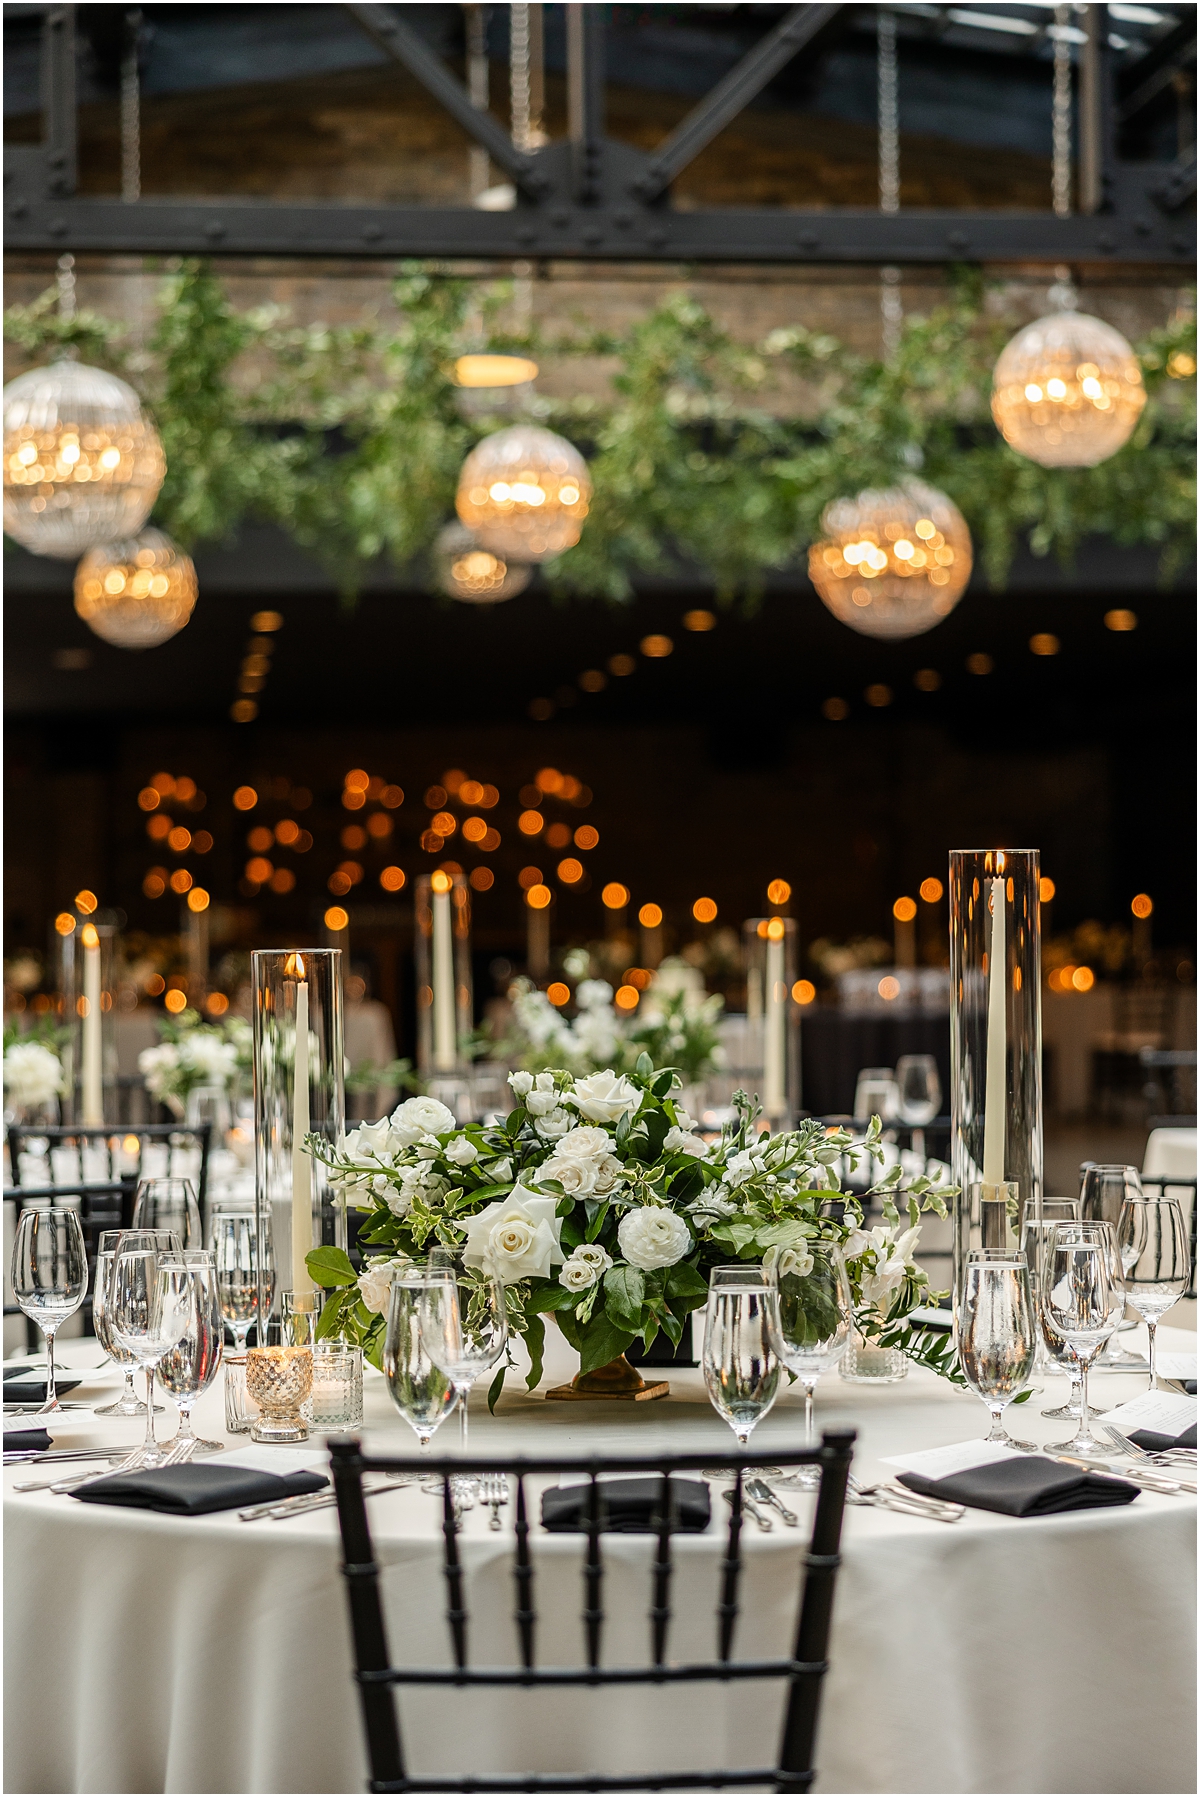 chic garden inspired tables capes and reception details from Revel Motor Row wedding